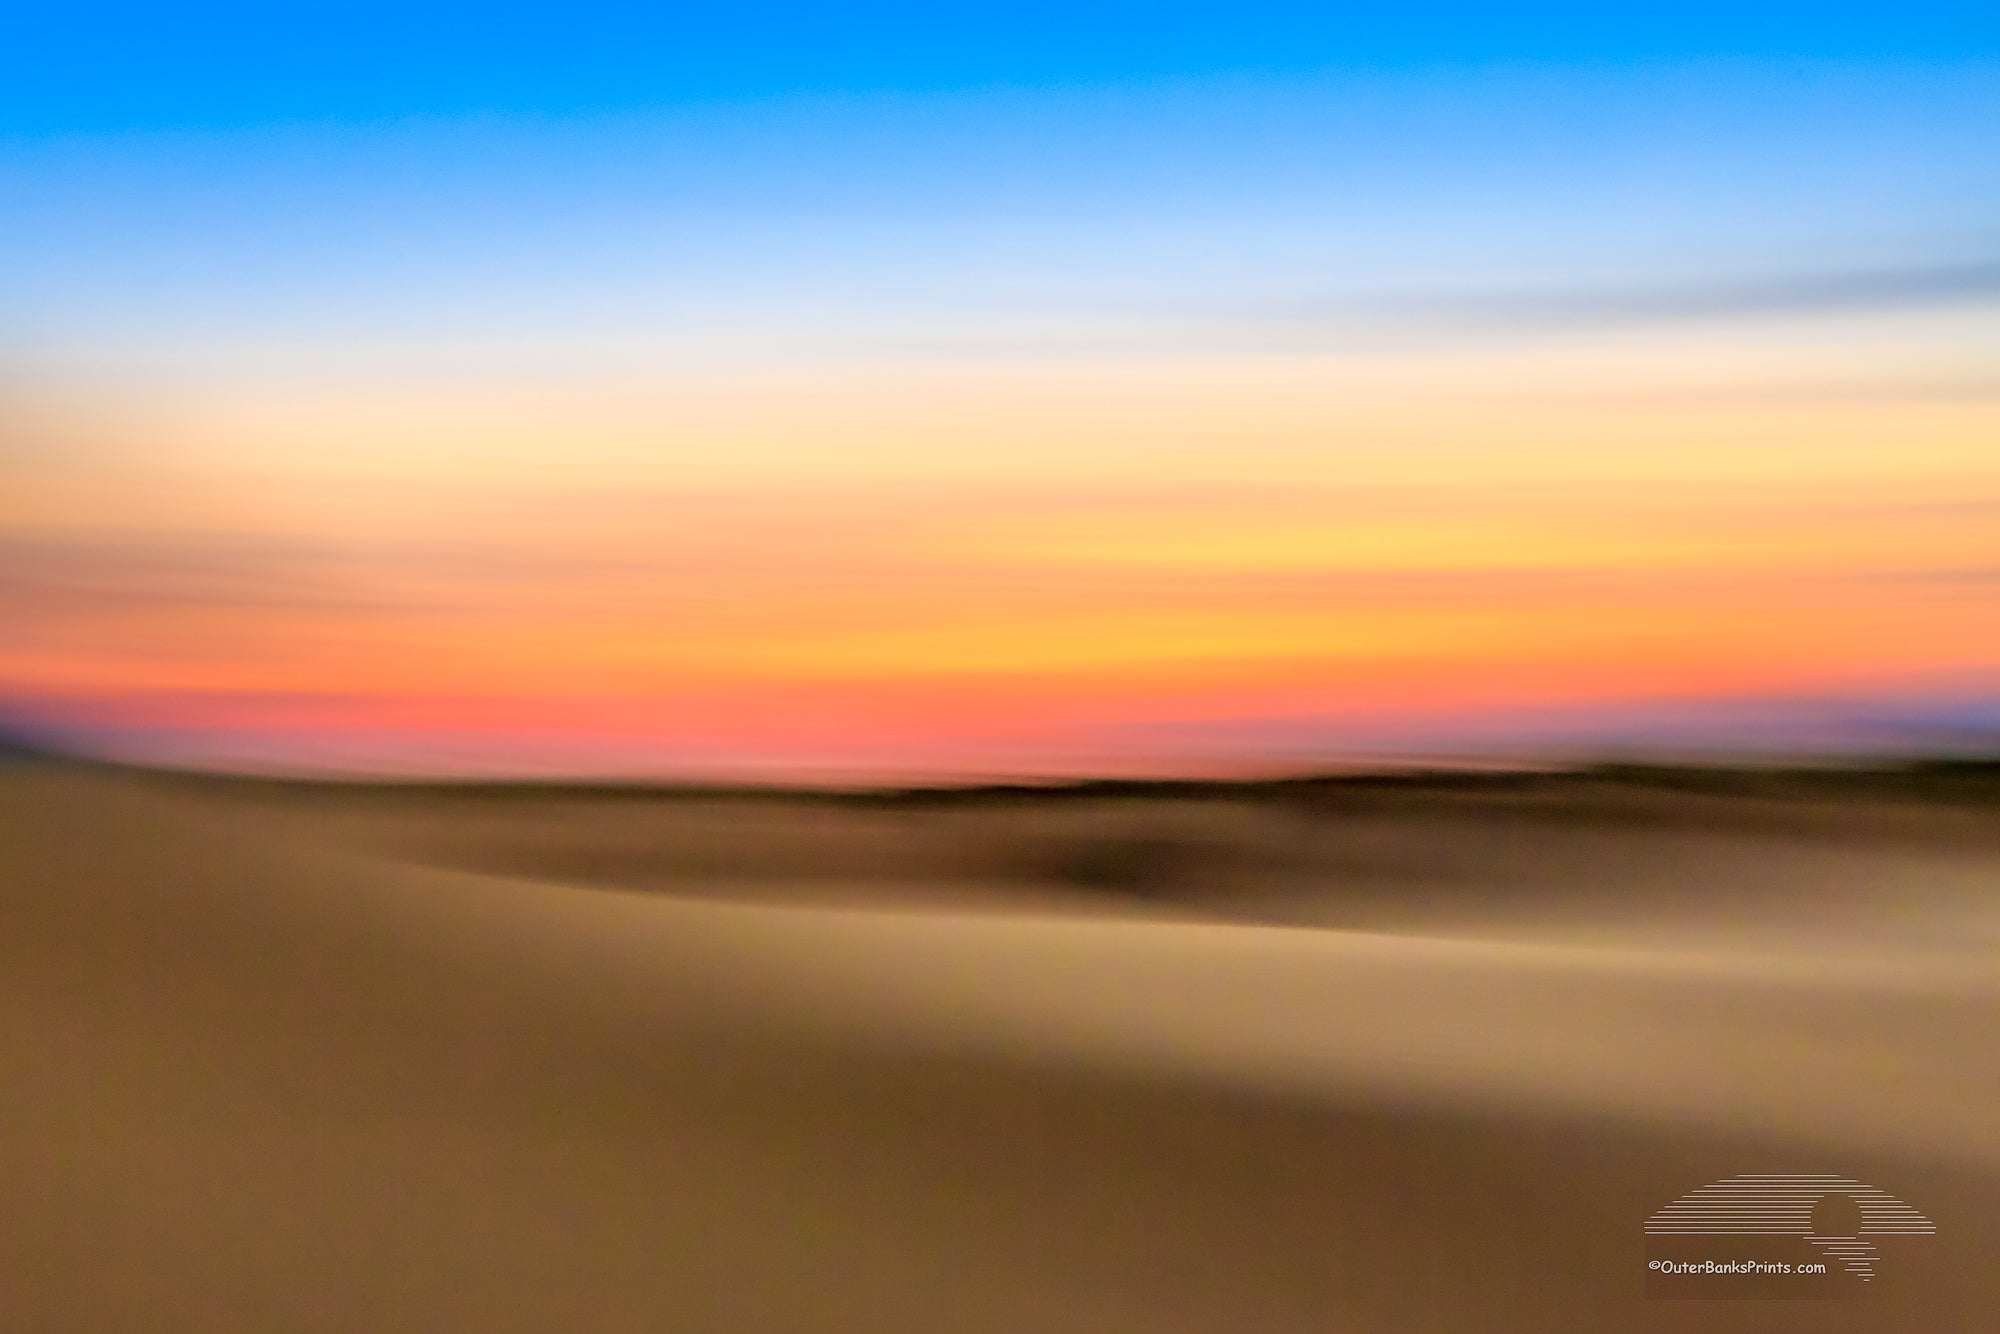 An impression of Jockey's Ridge State Park at sunset. Moving the camera while the shutter is open creates impressionistic photographs.